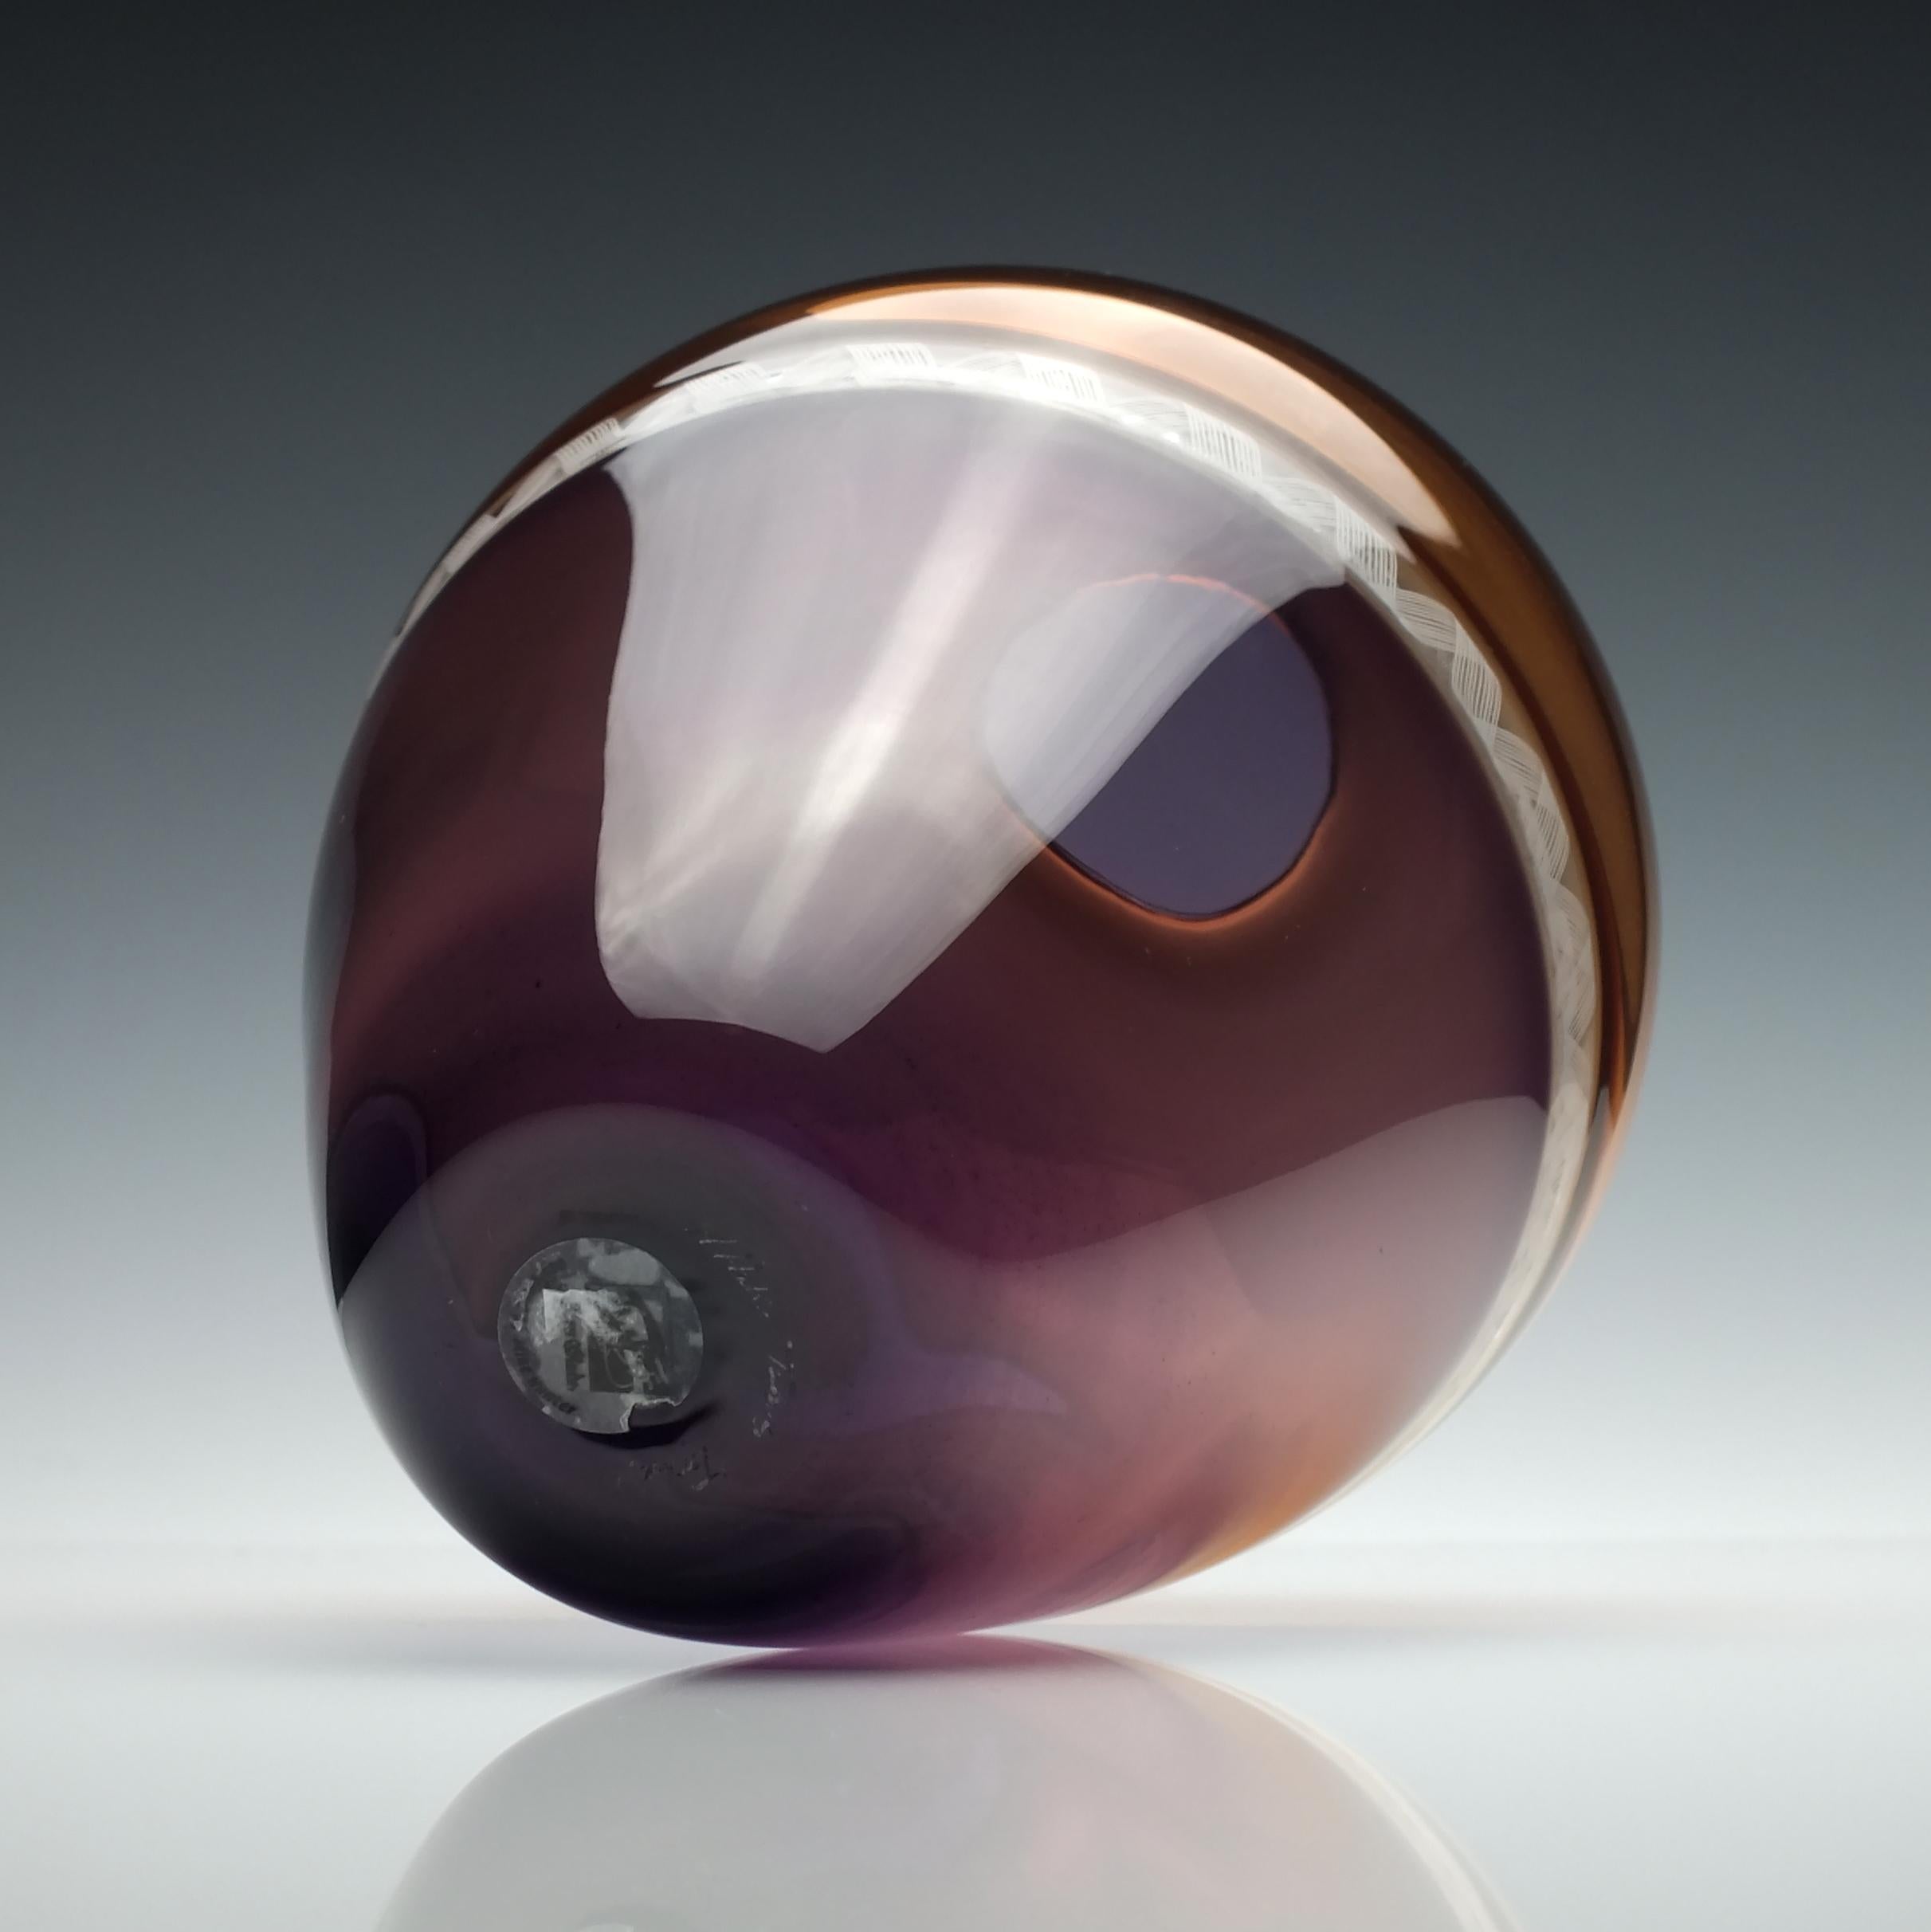 Hand-Crafted Orange and Amethyst Mike Hunter Torsade Incalmo Glass Vessel For Sale